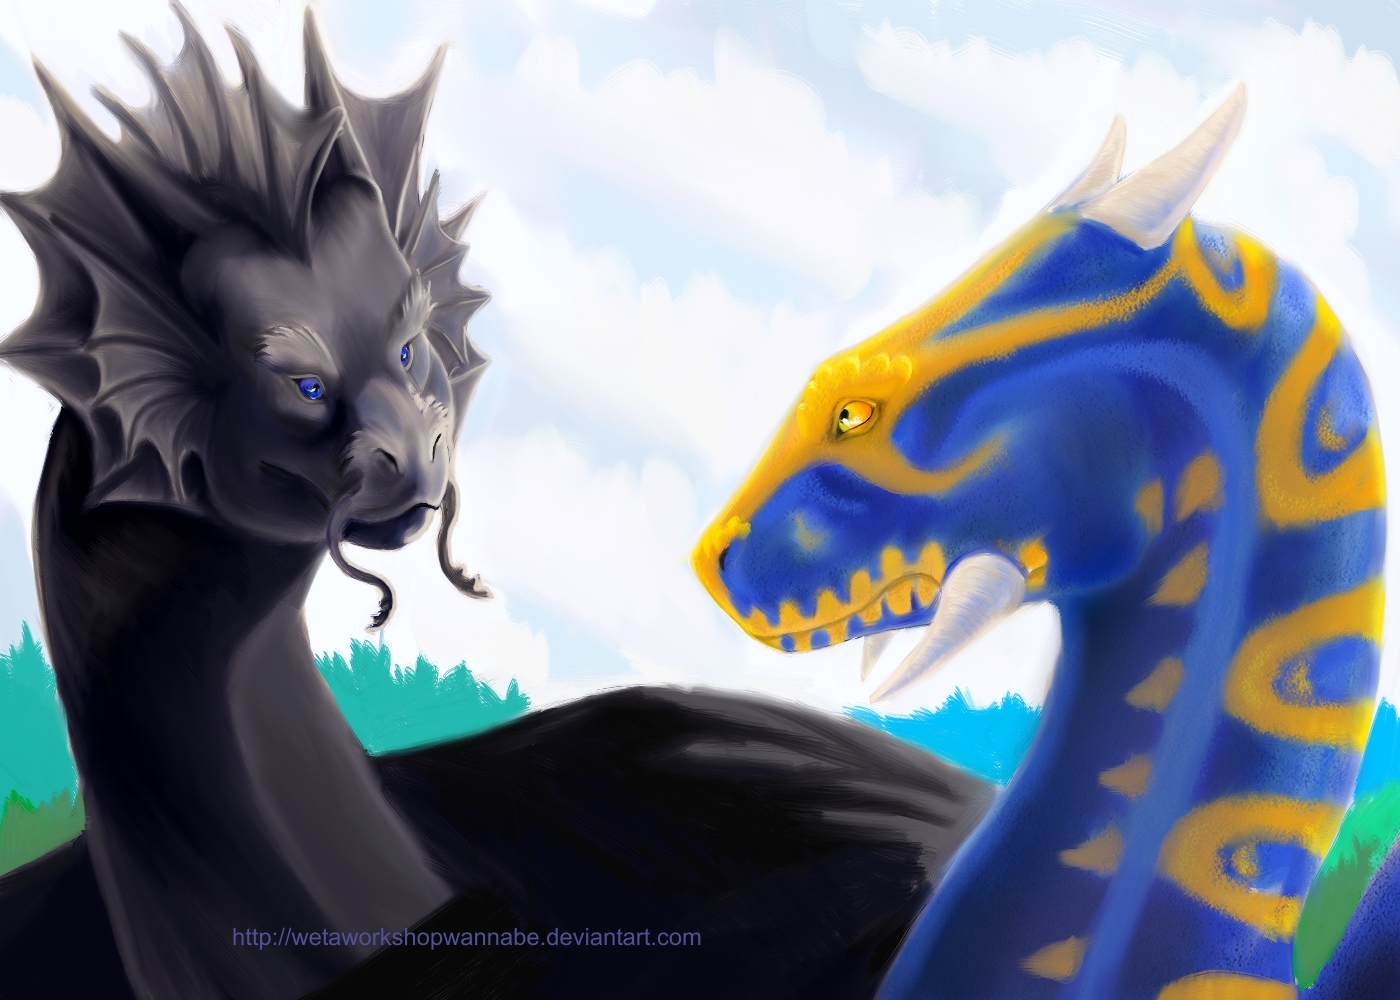 --Image-File.Temeraire and Lily.jpg--